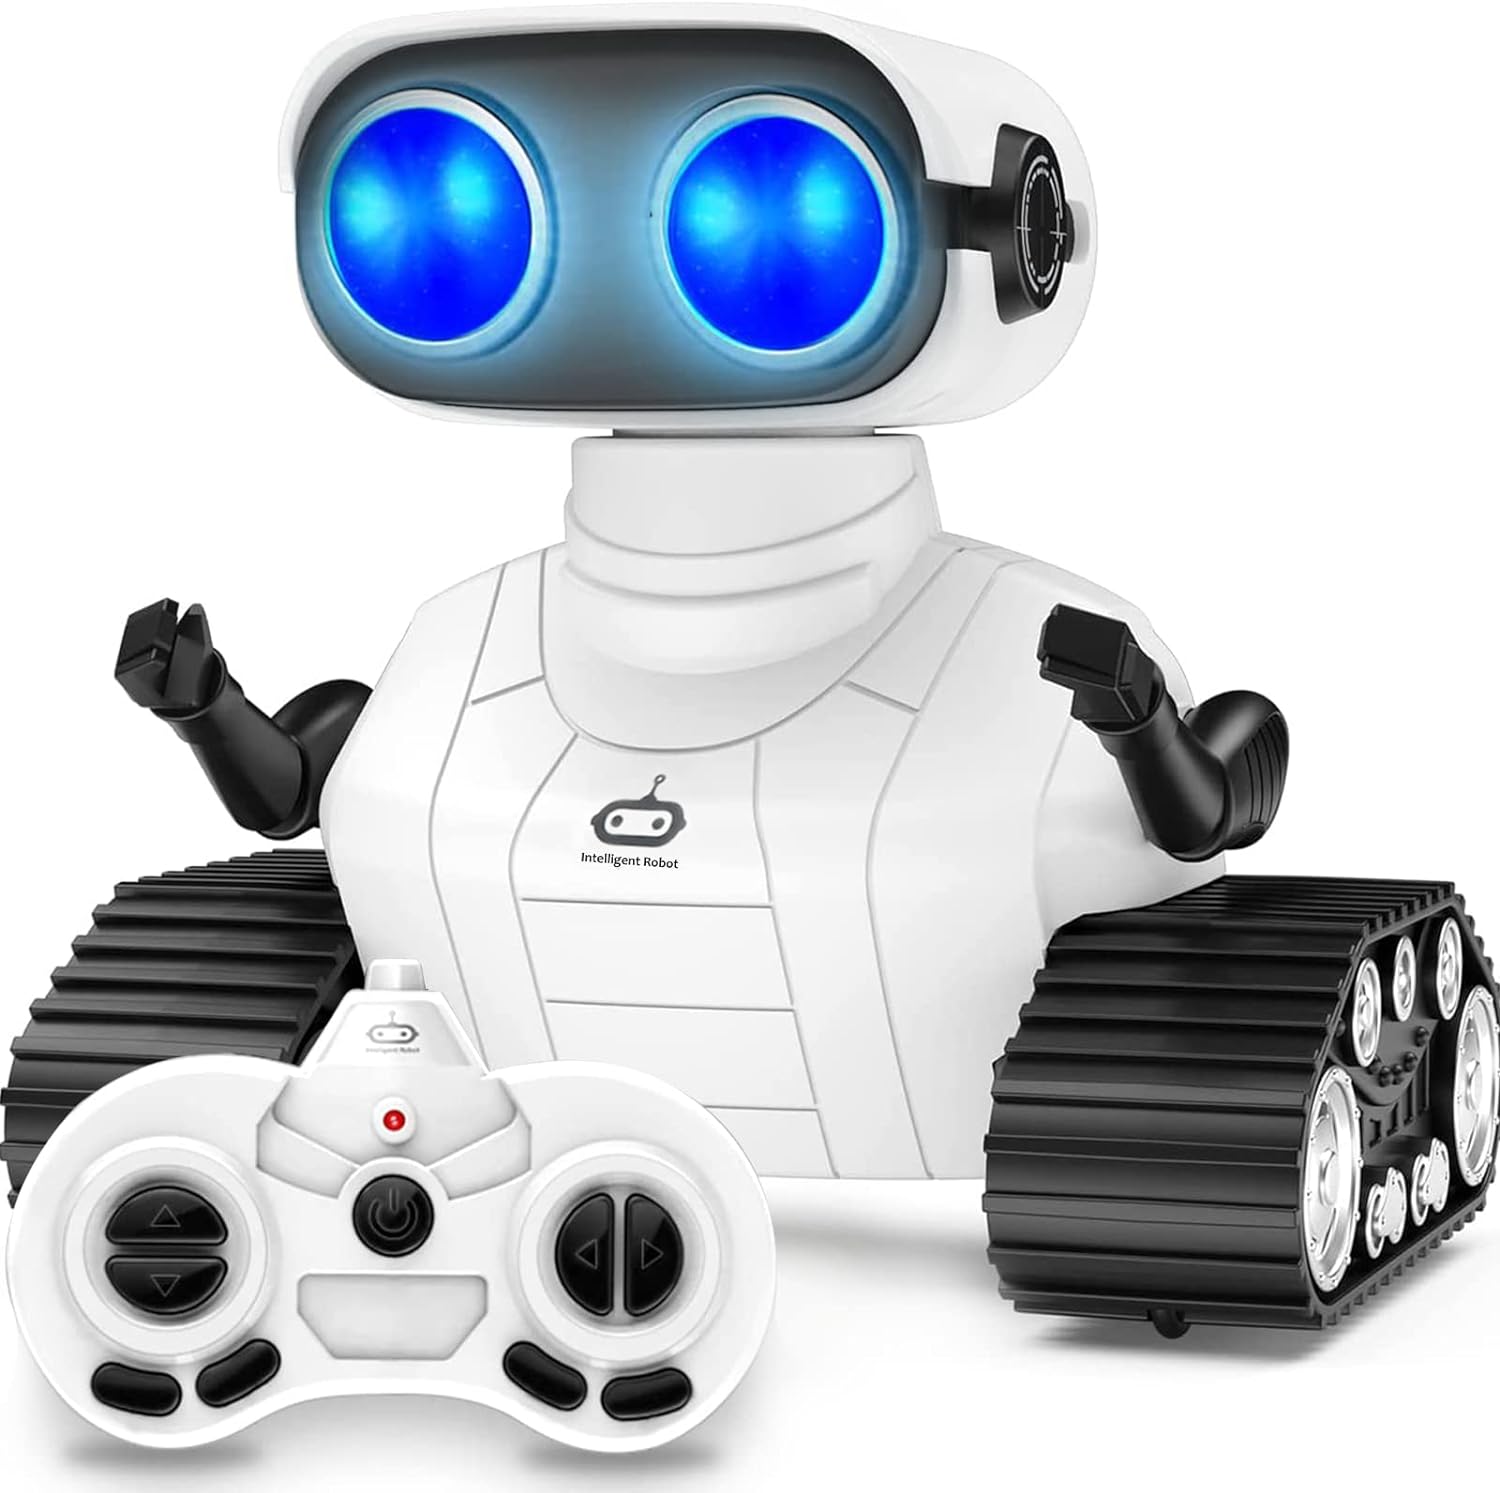 CUUPA Robot Toys: The Perfect Remote Control Robots for Kids